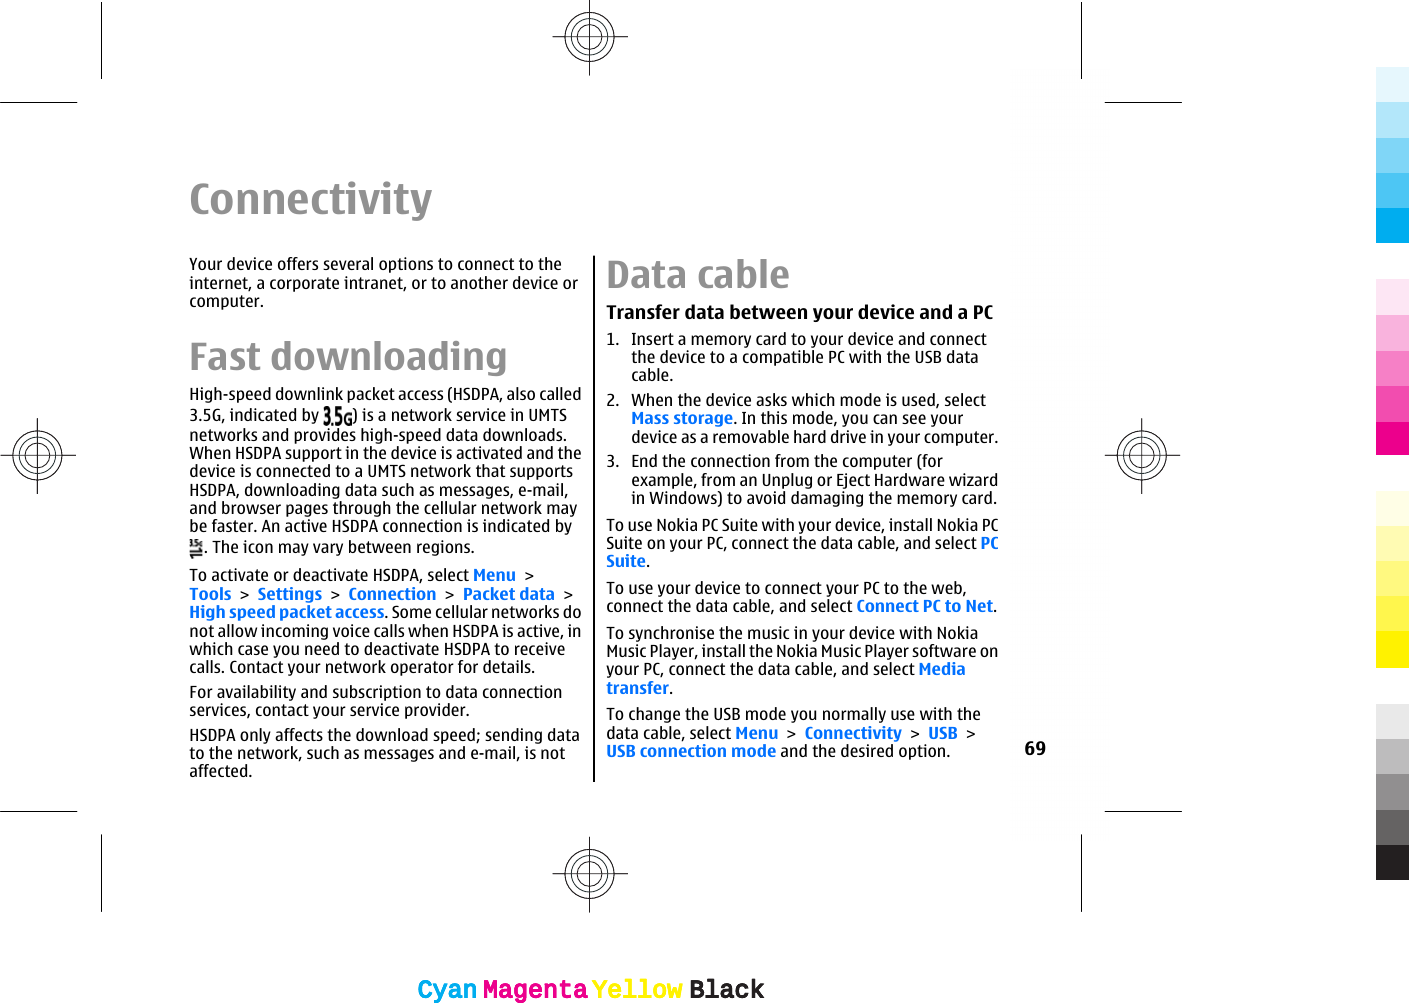 ConnectivityYour device offers several options to connect to theinternet, a corporate intranet, or to another device orcomputer.Fast downloadingHigh-speed downlink packet access (HSDPA, also called3.5G, indicated by  ) is a network service in UMTSnetworks and provides high-speed data downloads.When HSDPA support in the device is activated and thedevice is connected to a UMTS network that supportsHSDPA, downloading data such as messages, e-mail,and browser pages through the cellular network maybe faster. An active HSDPA connection is indicated by. The icon may vary between regions.To activate or deactivate HSDPA, select Menu &gt;Tools &gt; Settings &gt; Connection &gt; Packet data &gt;High speed packet access. Some cellular networks donot allow incoming voice calls when HSDPA is active, inwhich case you need to deactivate HSDPA to receivecalls. Contact your network operator for details.For availability and subscription to data connectionservices, contact your service provider.HSDPA only affects the download speed; sending datato the network, such as messages and e-mail, is notaffected.Data cableTransfer data between your device and a PC1. Insert a memory card to your device and connectthe device to a compatible PC with the USB datacable.2. When the device asks which mode is used, selectMass storage. In this mode, you can see yourdevice as a removable hard drive in your computer.3. End the connection from the computer (forexample, from an Unplug or Eject Hardware wizardin Windows) to avoid damaging the memory card.To use Nokia PC Suite with your device, install Nokia PCSuite on your PC, connect the data cable, and select PCSuite.To use your device to connect your PC to the web,connect the data cable, and select Connect PC to Net.To synchronise the music in your device with NokiaMusic Player, install the Nokia Music Player software onyour PC, connect the data cable, and select Mediatransfer.To change the USB mode you normally use with thedata cable, select Menu &gt; Connectivity &gt; USB &gt;USB connection mode and the desired option. 69CyanCyanMagentaMagentaYellowYellowBlackBlackCyanCyanMagentaMagentaYellowYellowBlackBlack